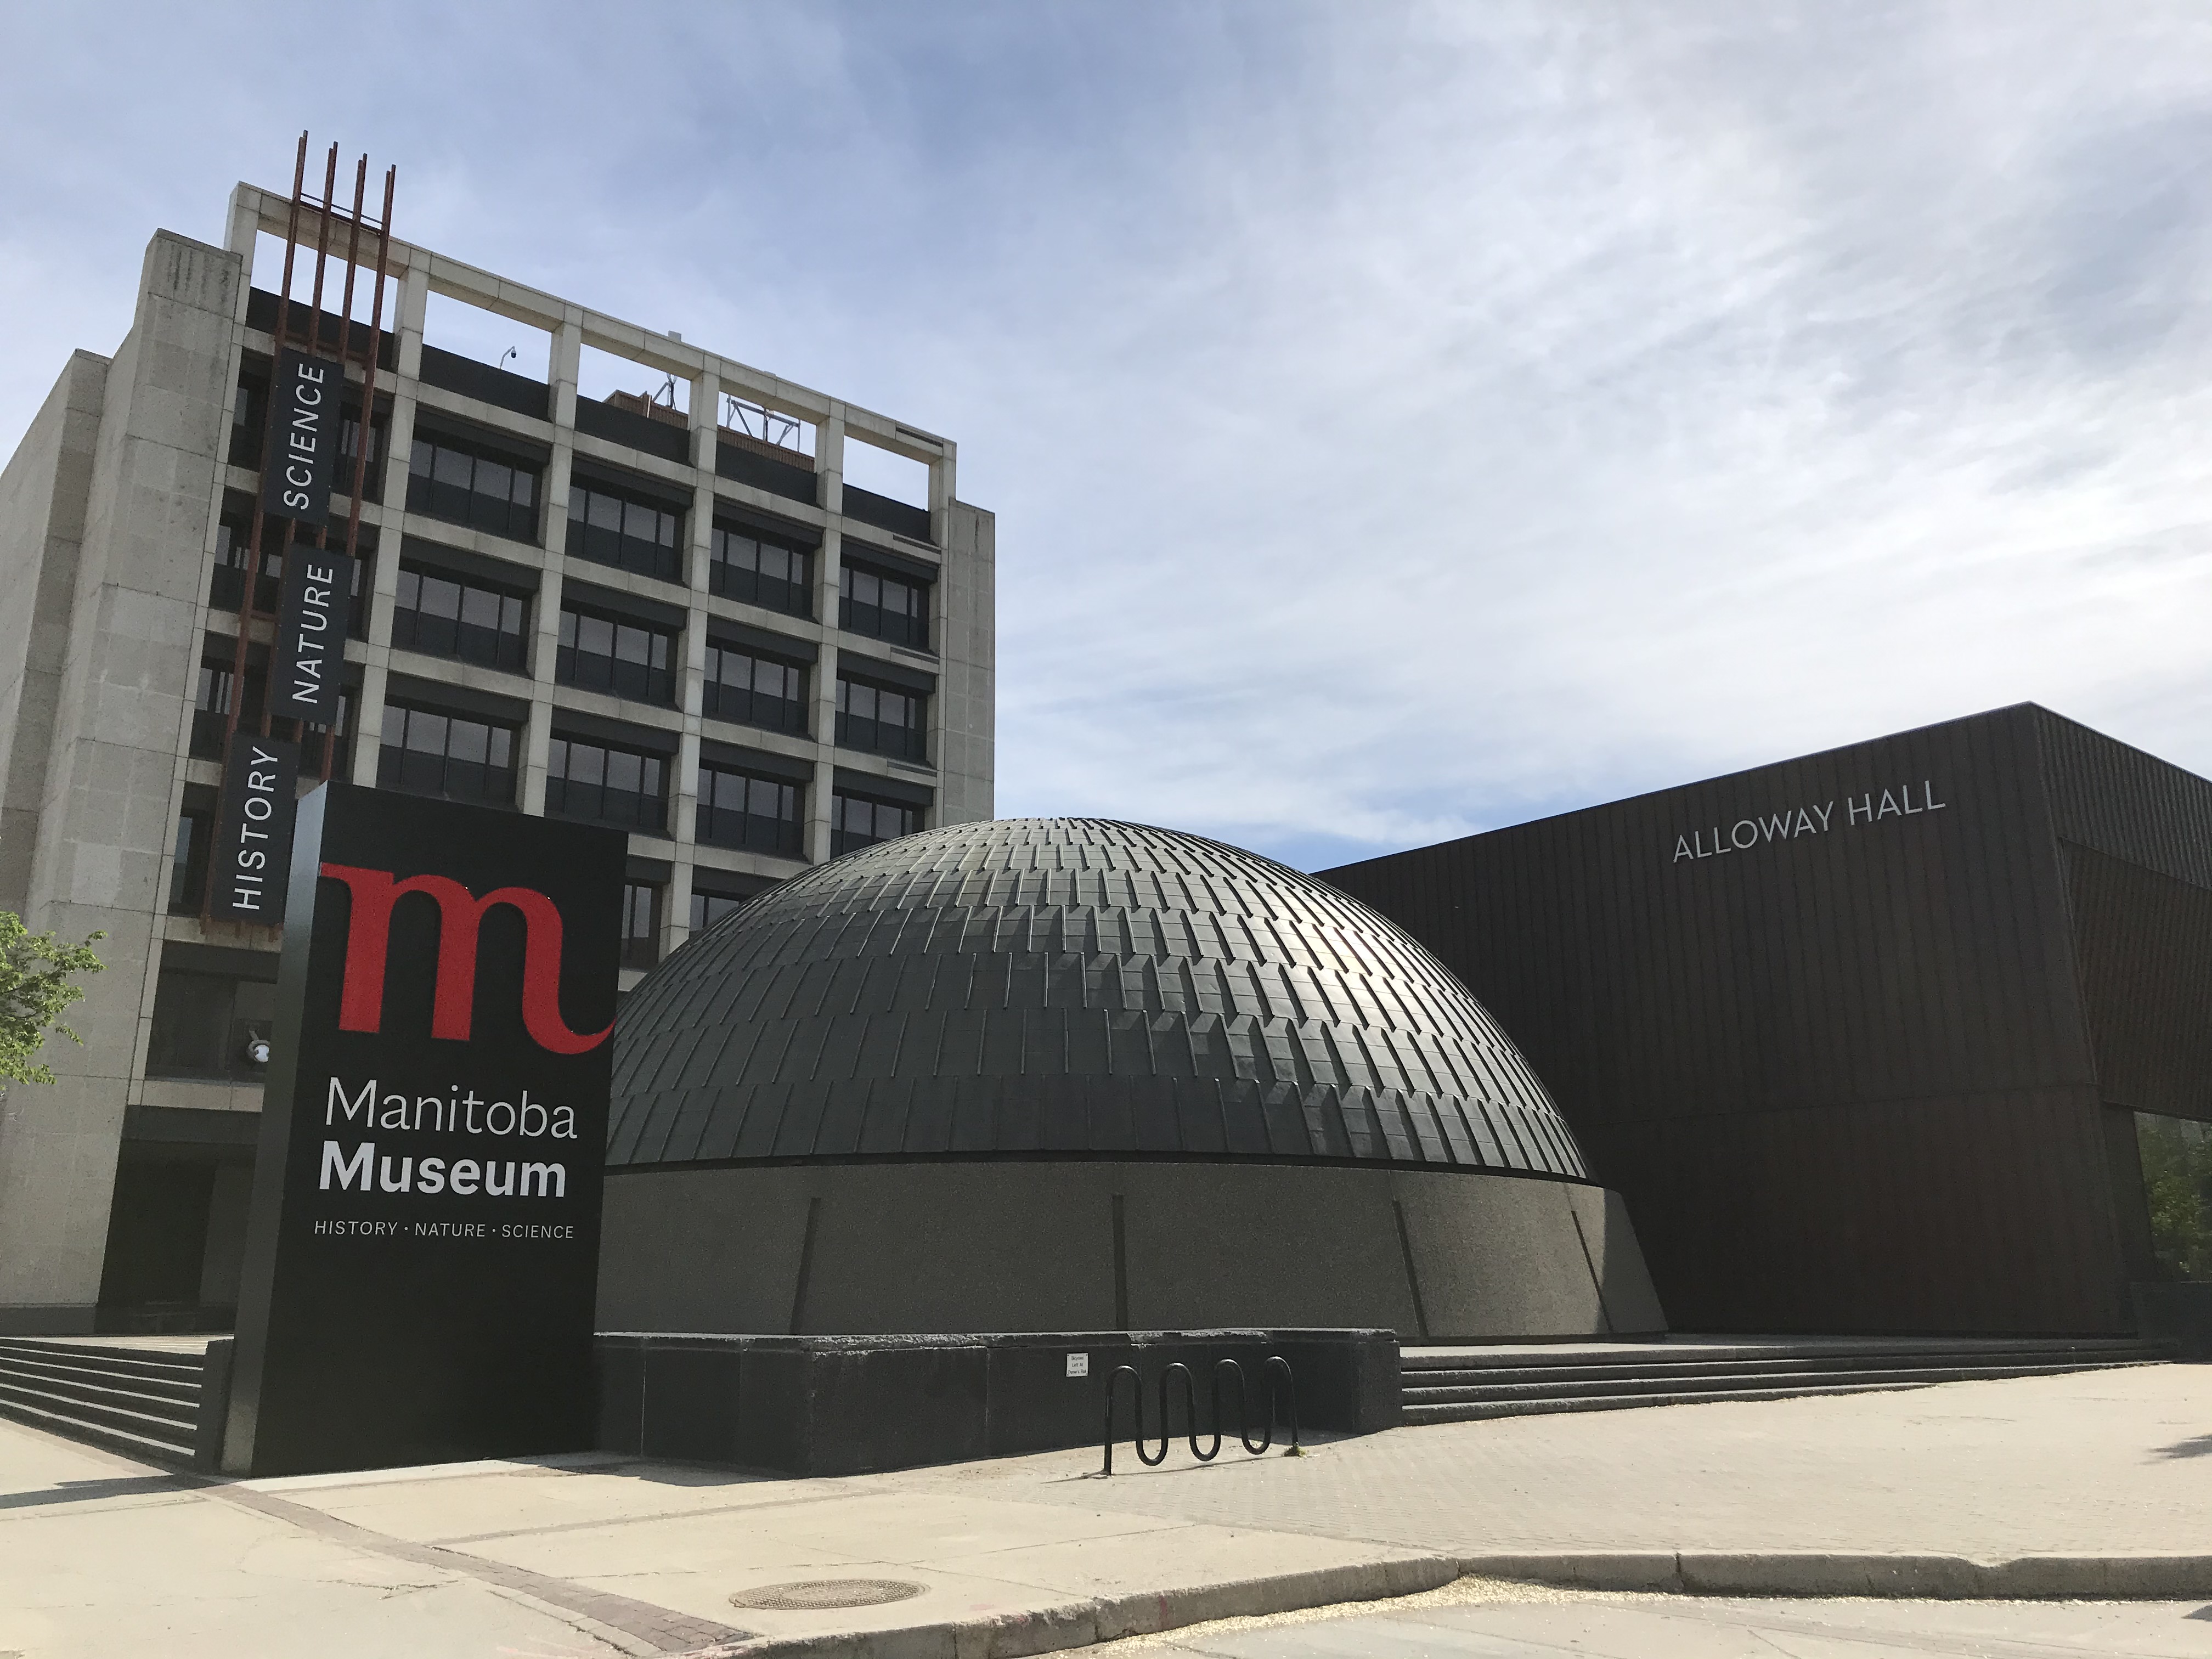 Exterior of the Manitoba Museum, with the Museum, Museum sign, and Planetarium dome in view.